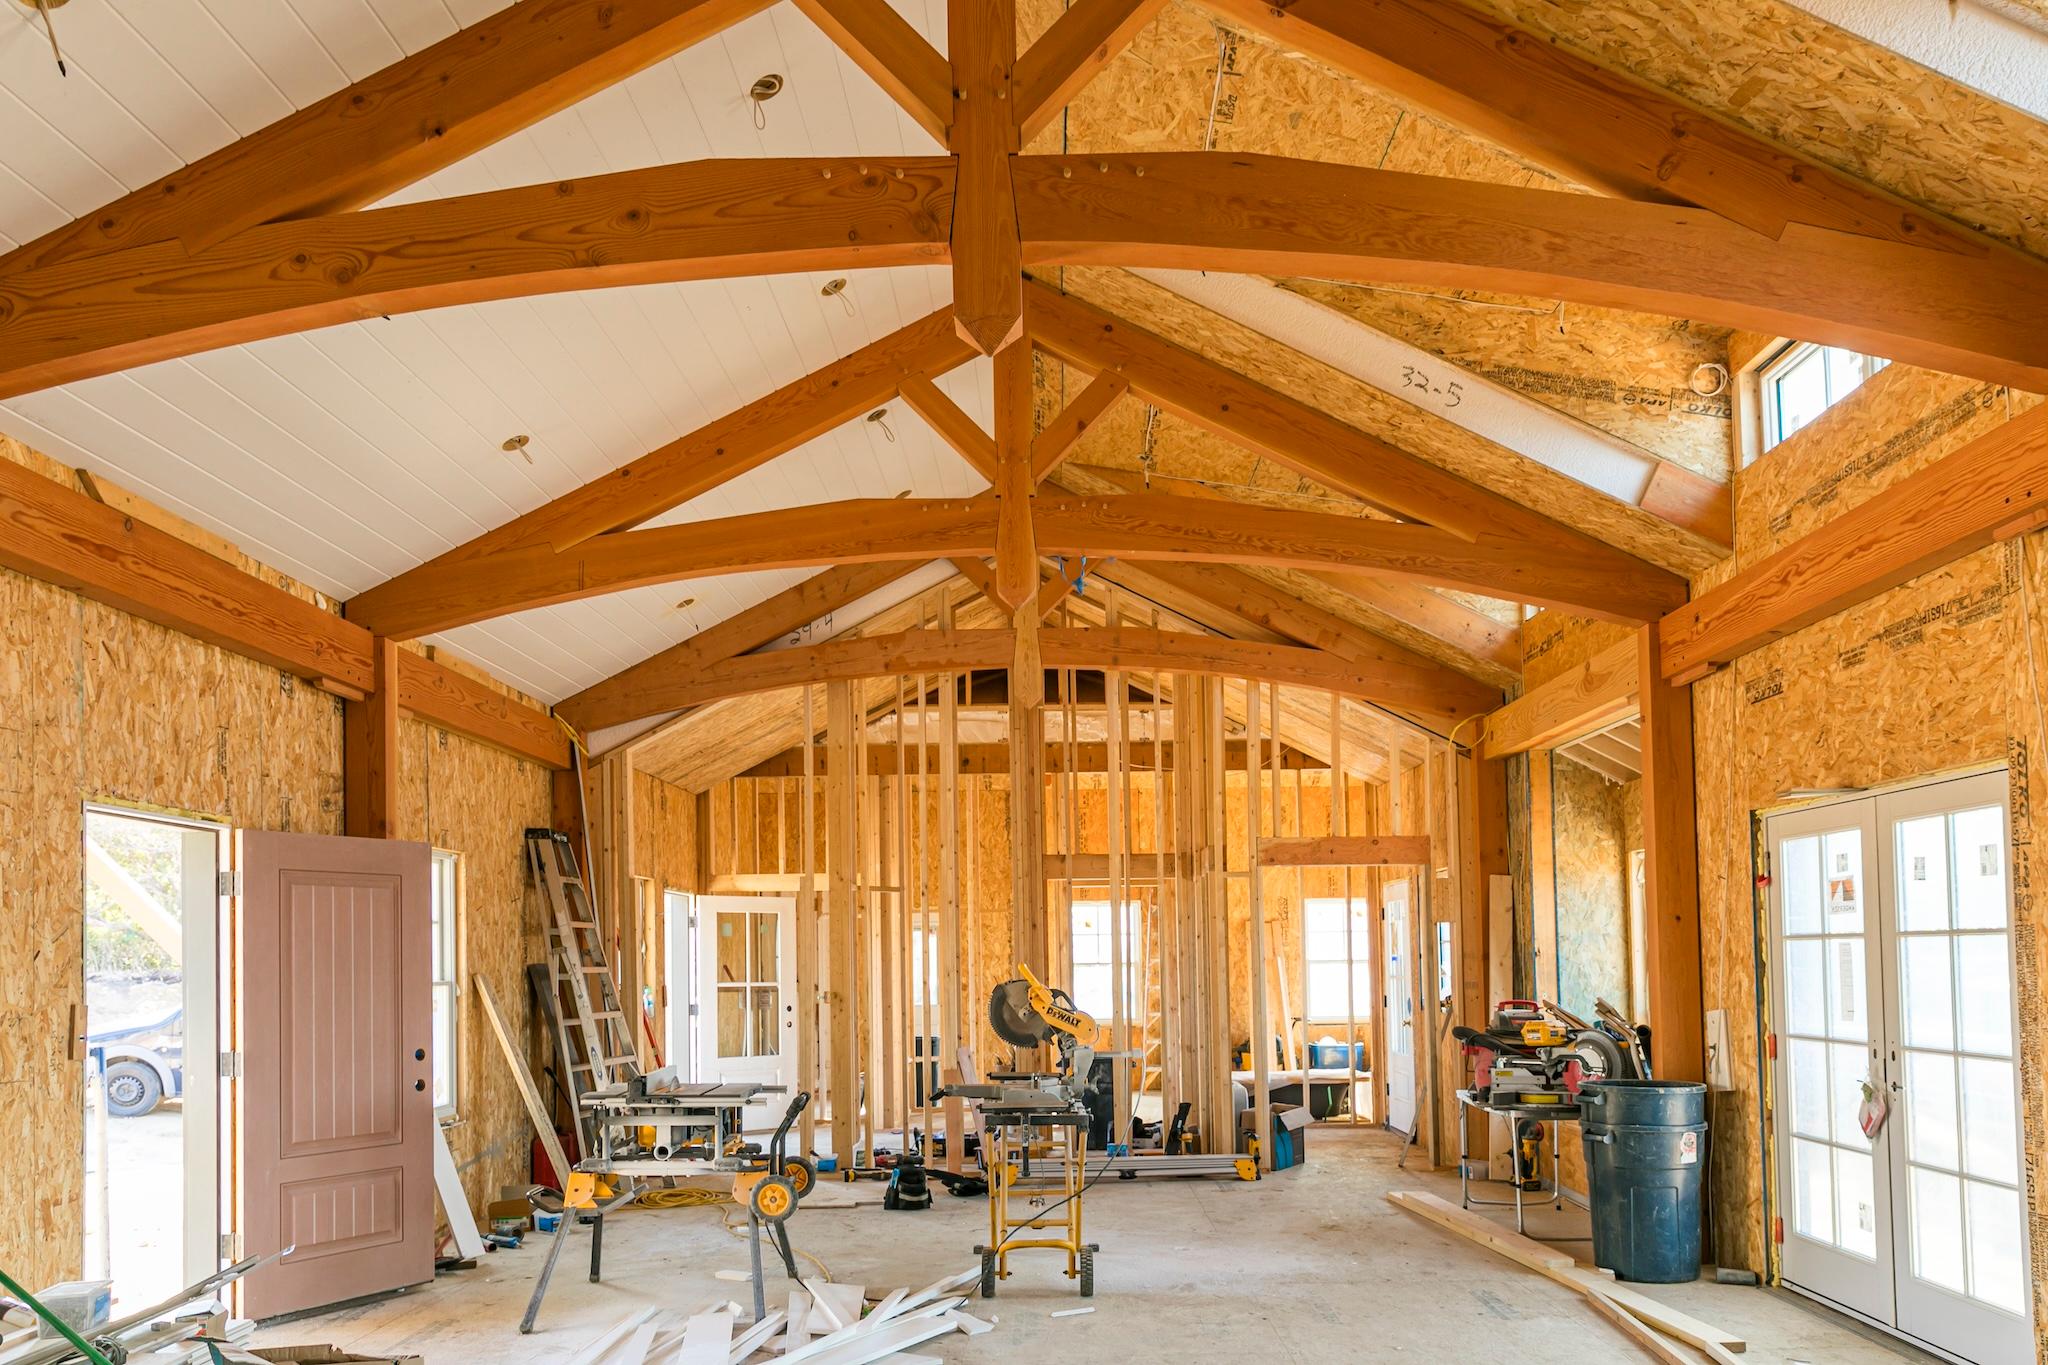 Home construction work in progress with framed interior, post & beam rafters, and equipment